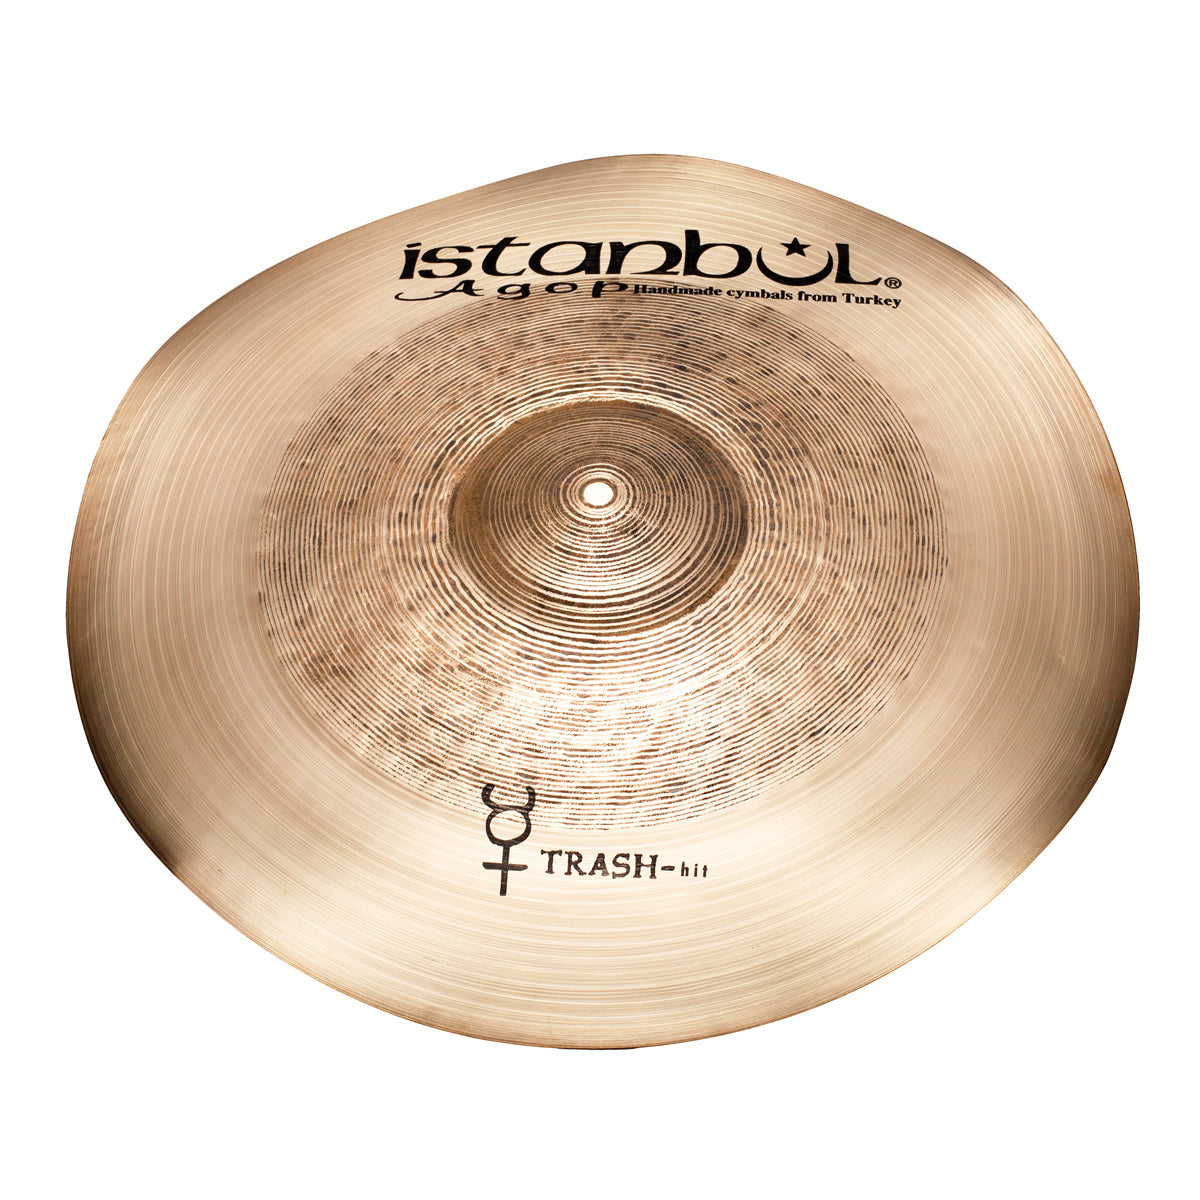 Istanbul Agop Traditional 16" Trash Hit